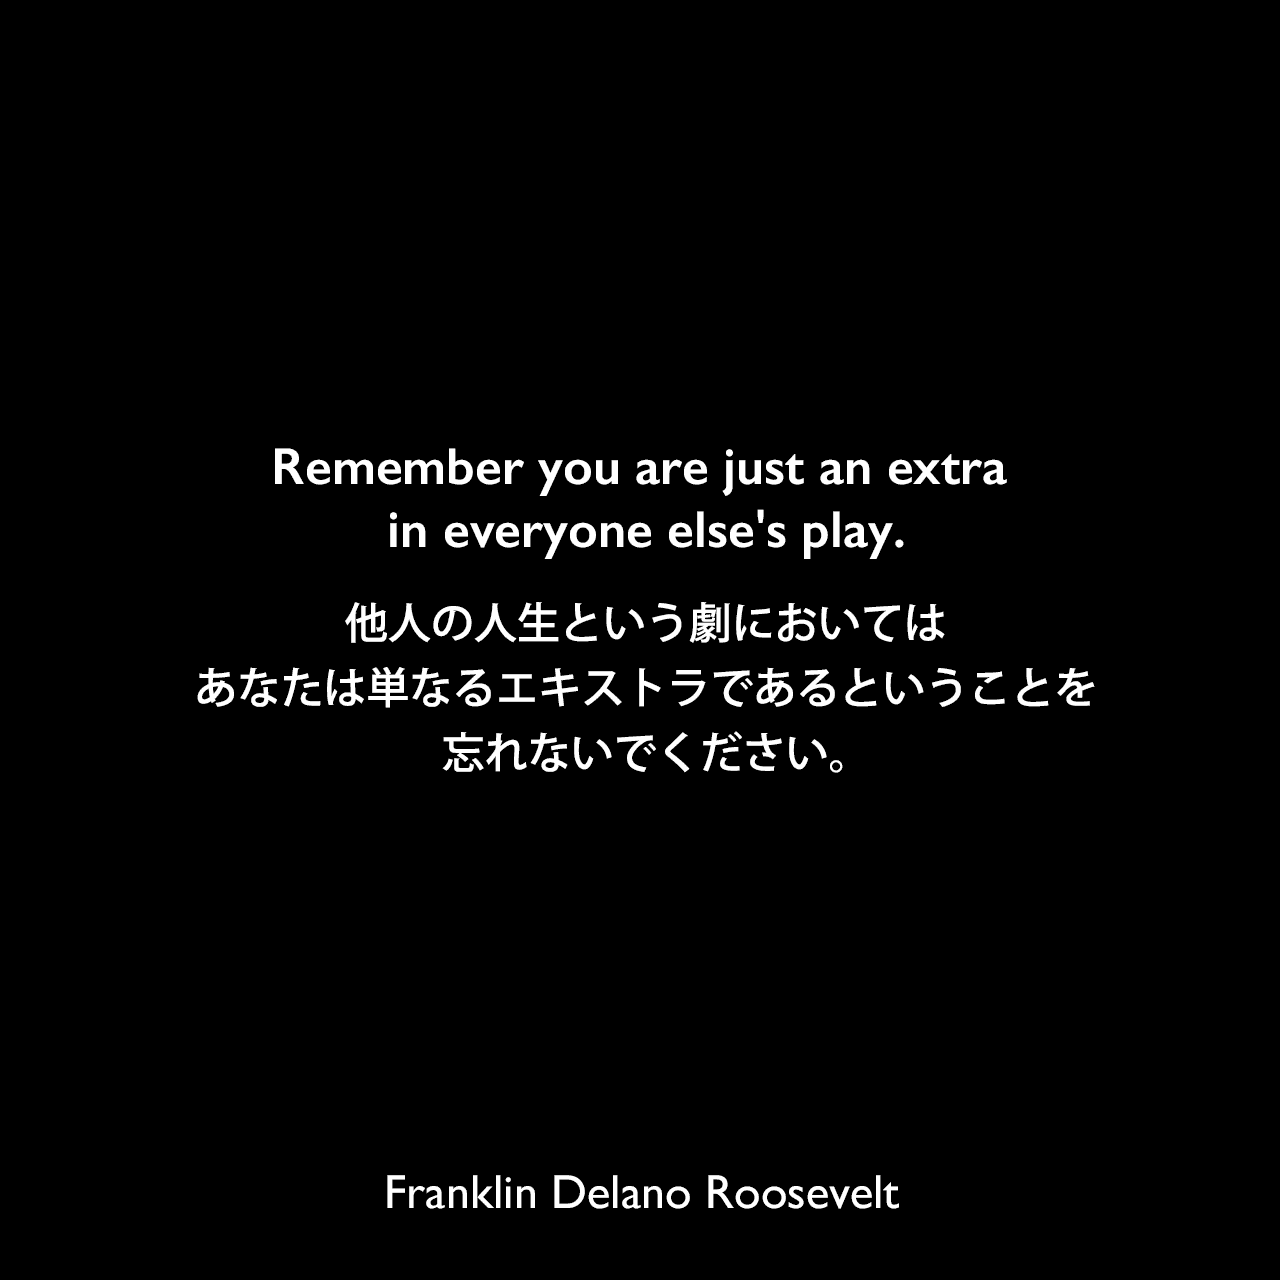 Remember you are just an extra in everyone else's play.他人の人生という劇においては、あなたは単なるエキストラであるということを忘れないでください。Franklin Delano Roosevelt